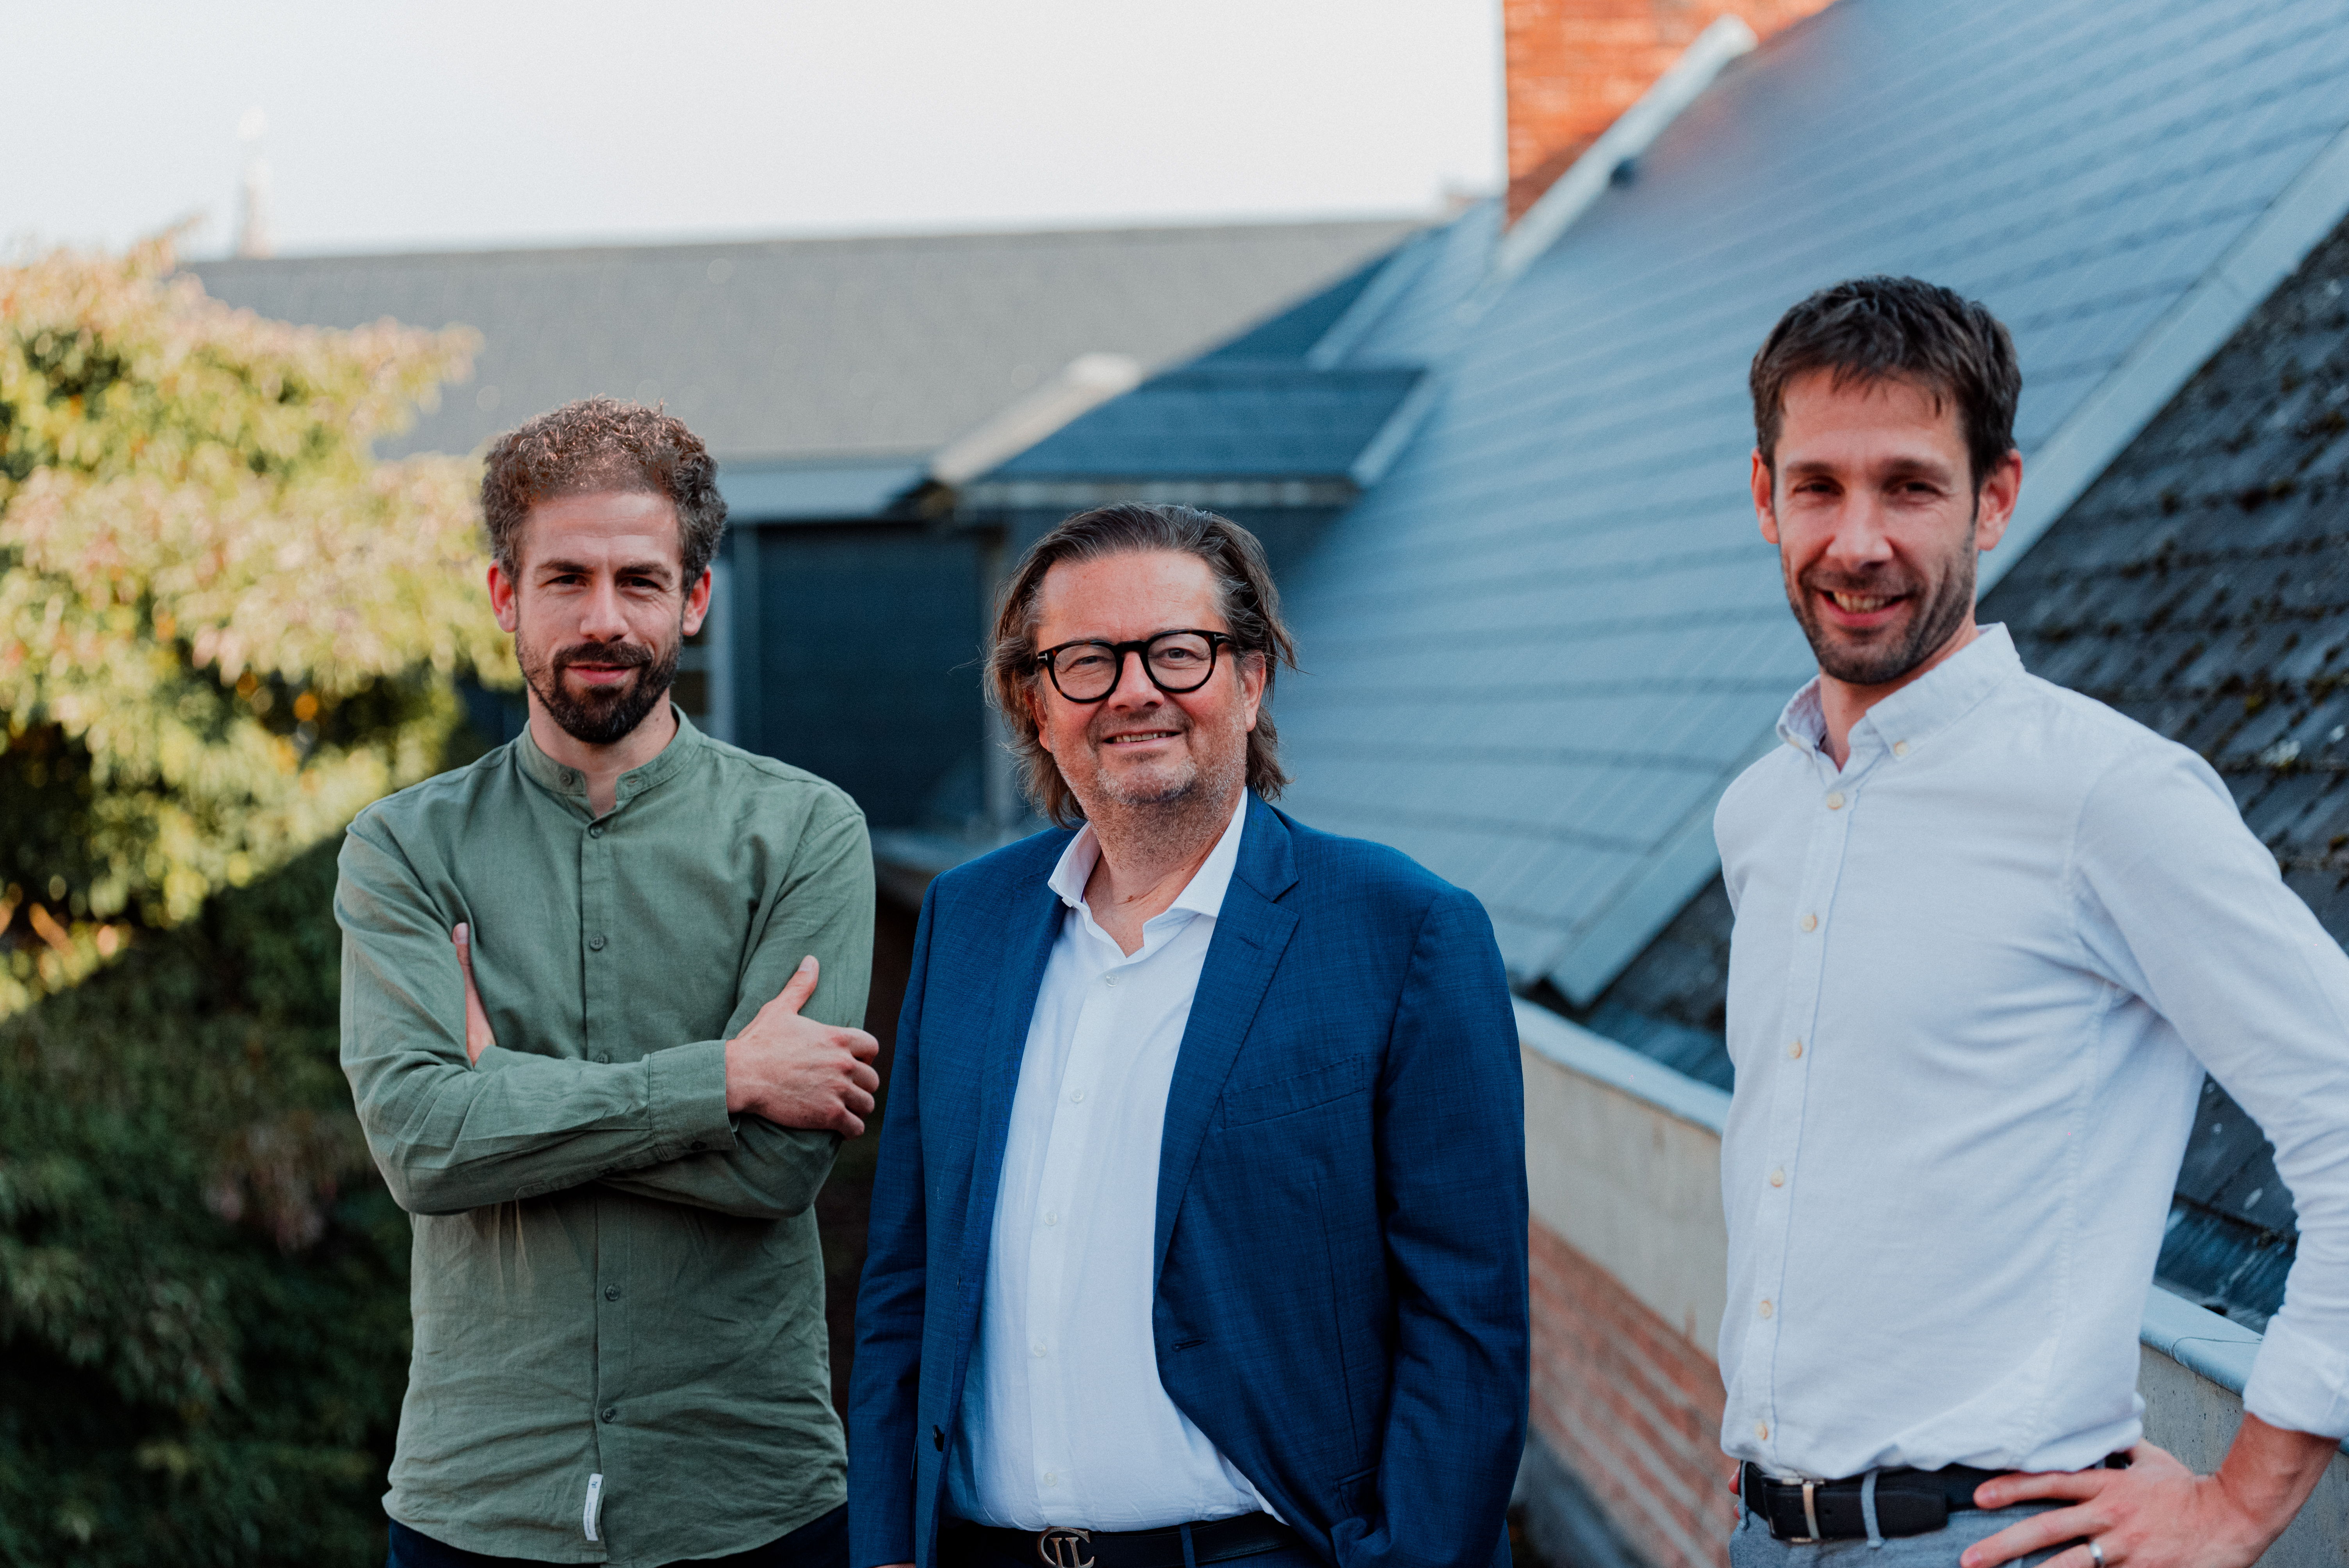 Sander Van den dries and Wouter Foulon, cofounders of Comate, with Marc Coucke